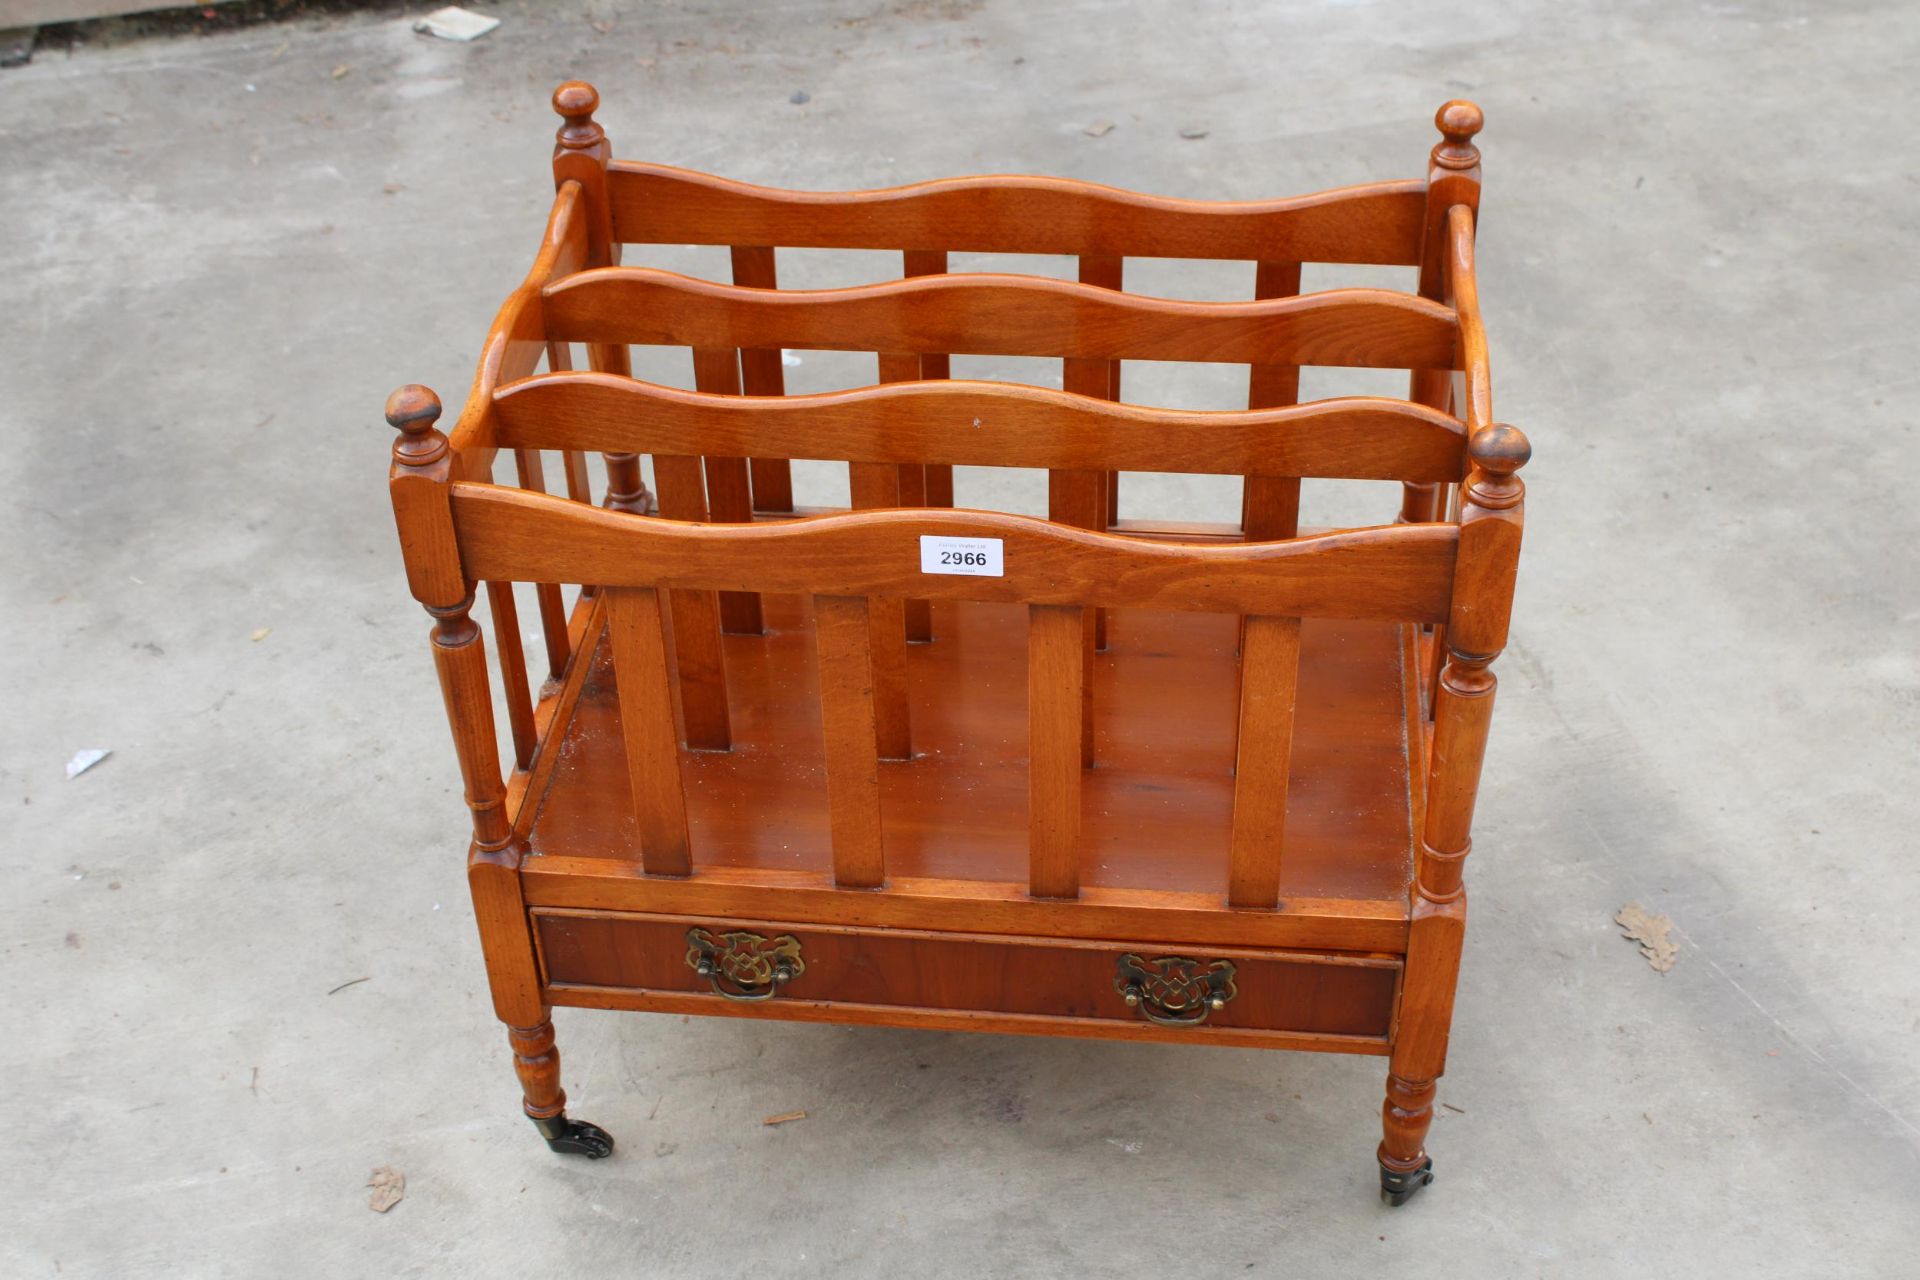 A REGENCY STYLE YEW WOOD THREE DIVISION CANTERBURY MAGAZINE RACK WITH LOWER DRAWER